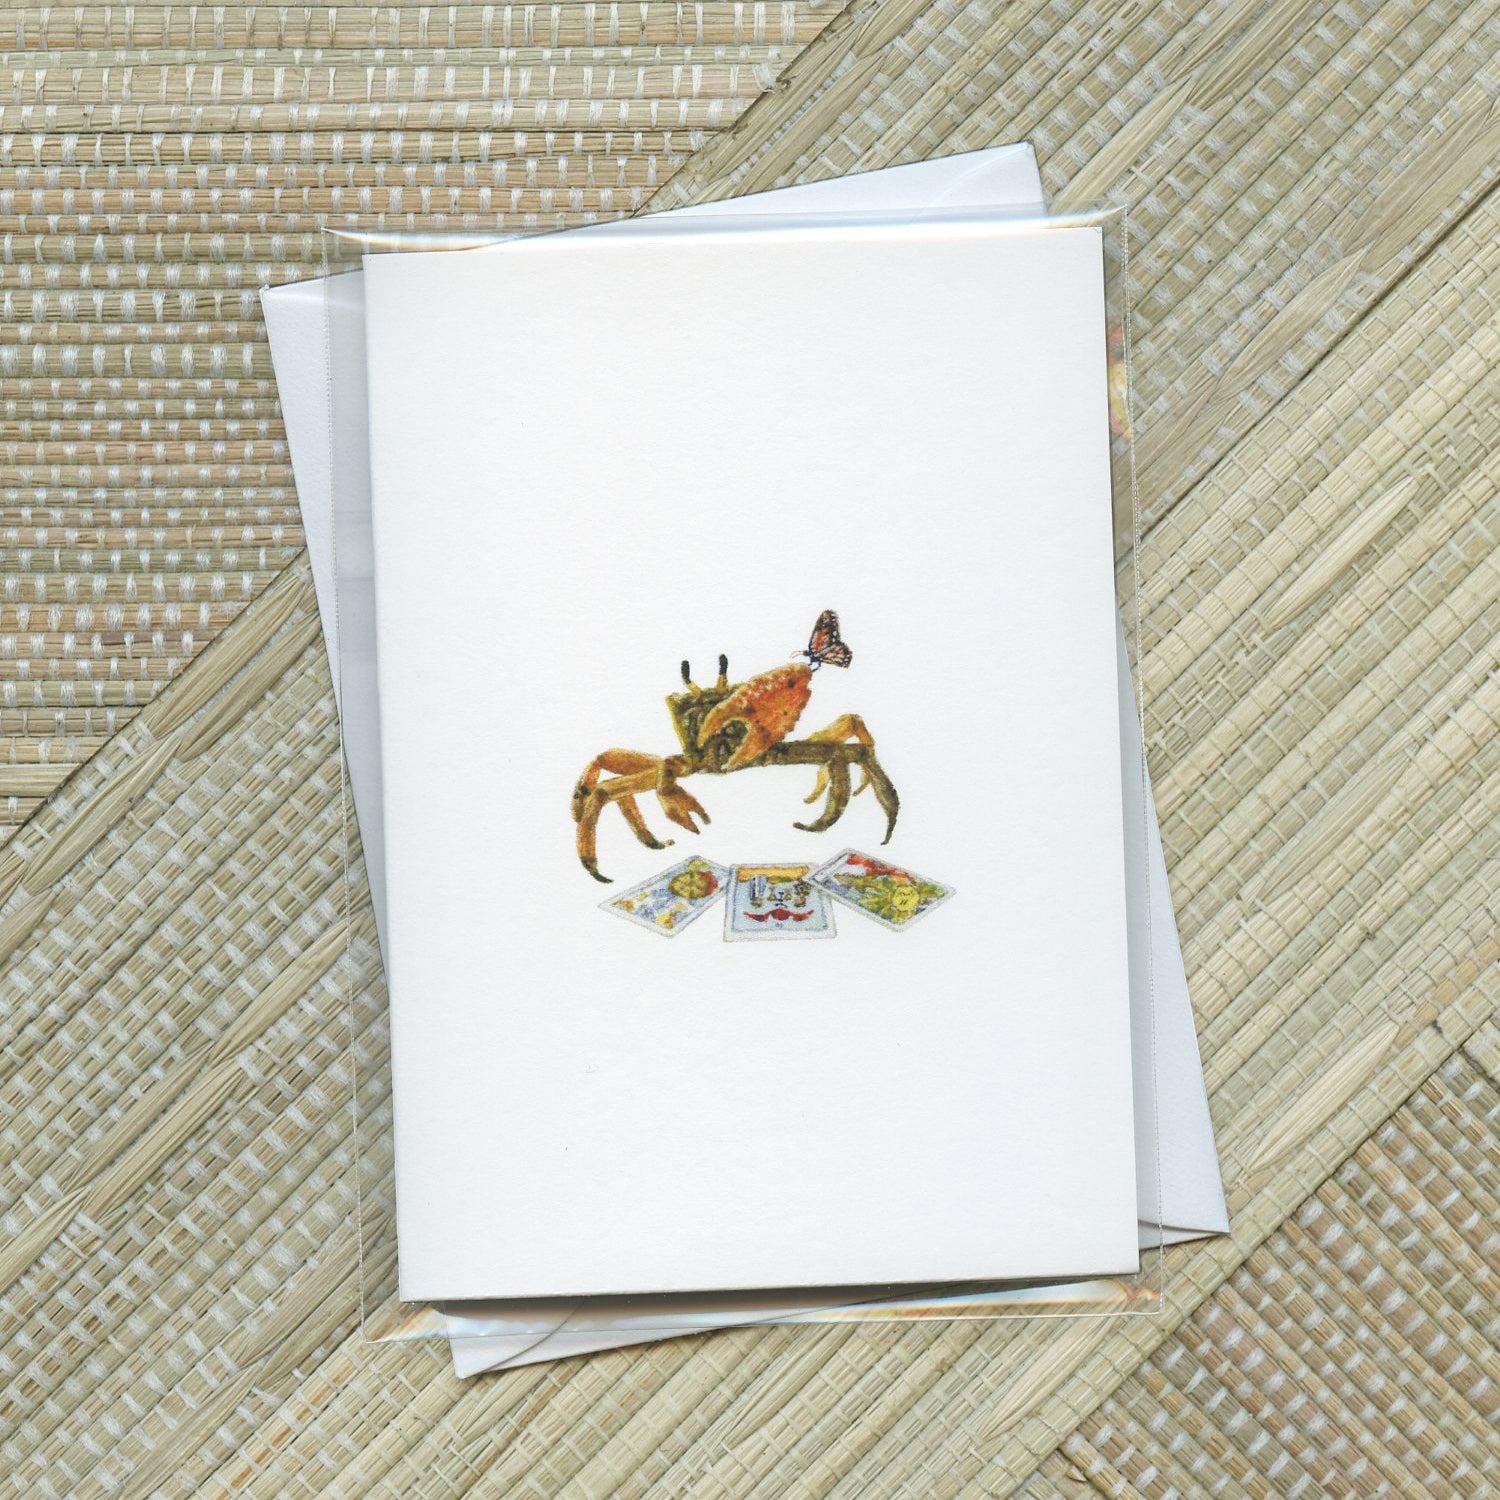 "Cancer" Greeting Card